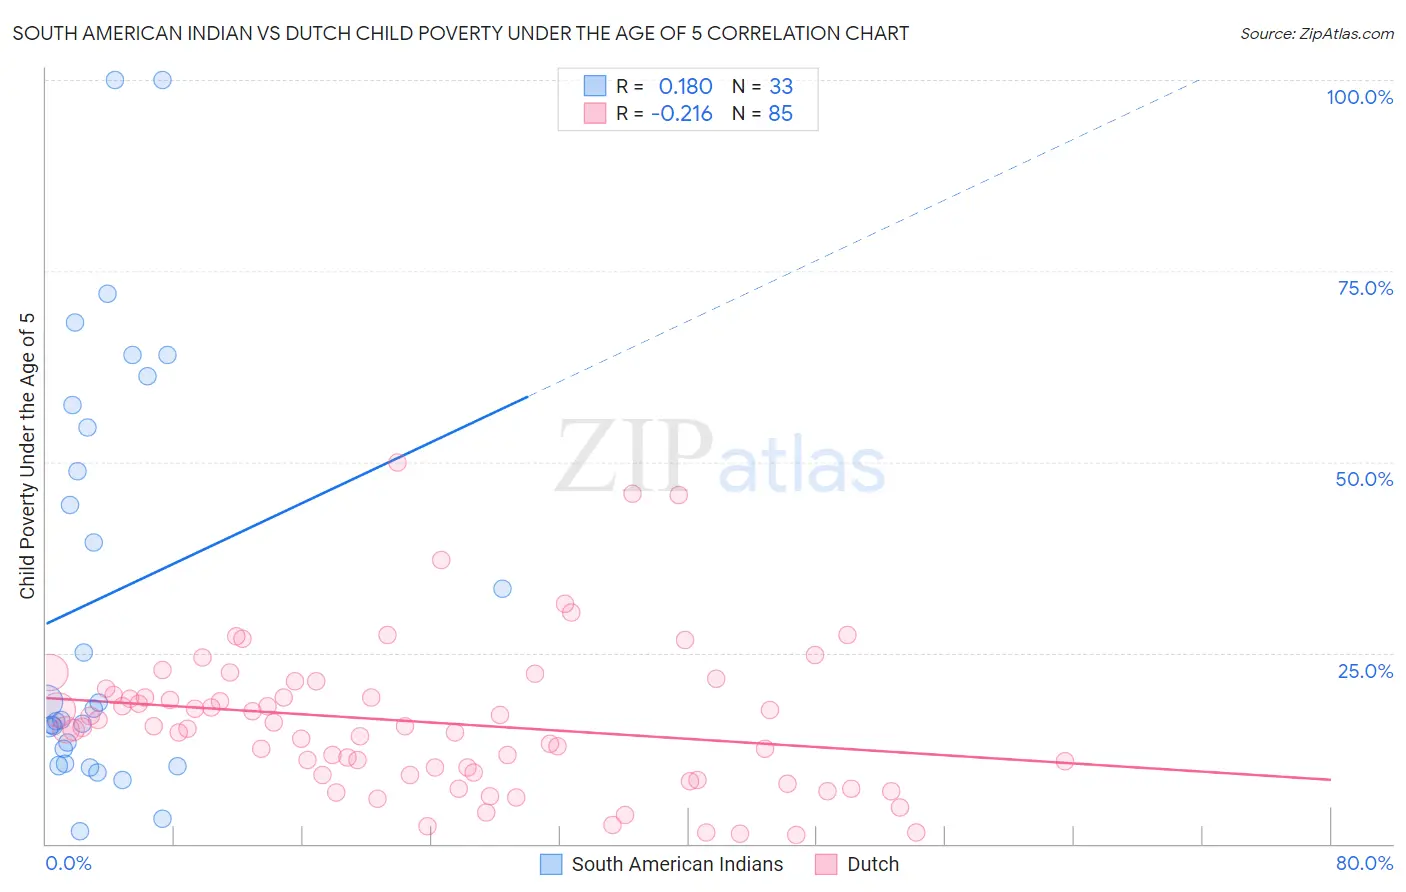 South American Indian vs Dutch Child Poverty Under the Age of 5